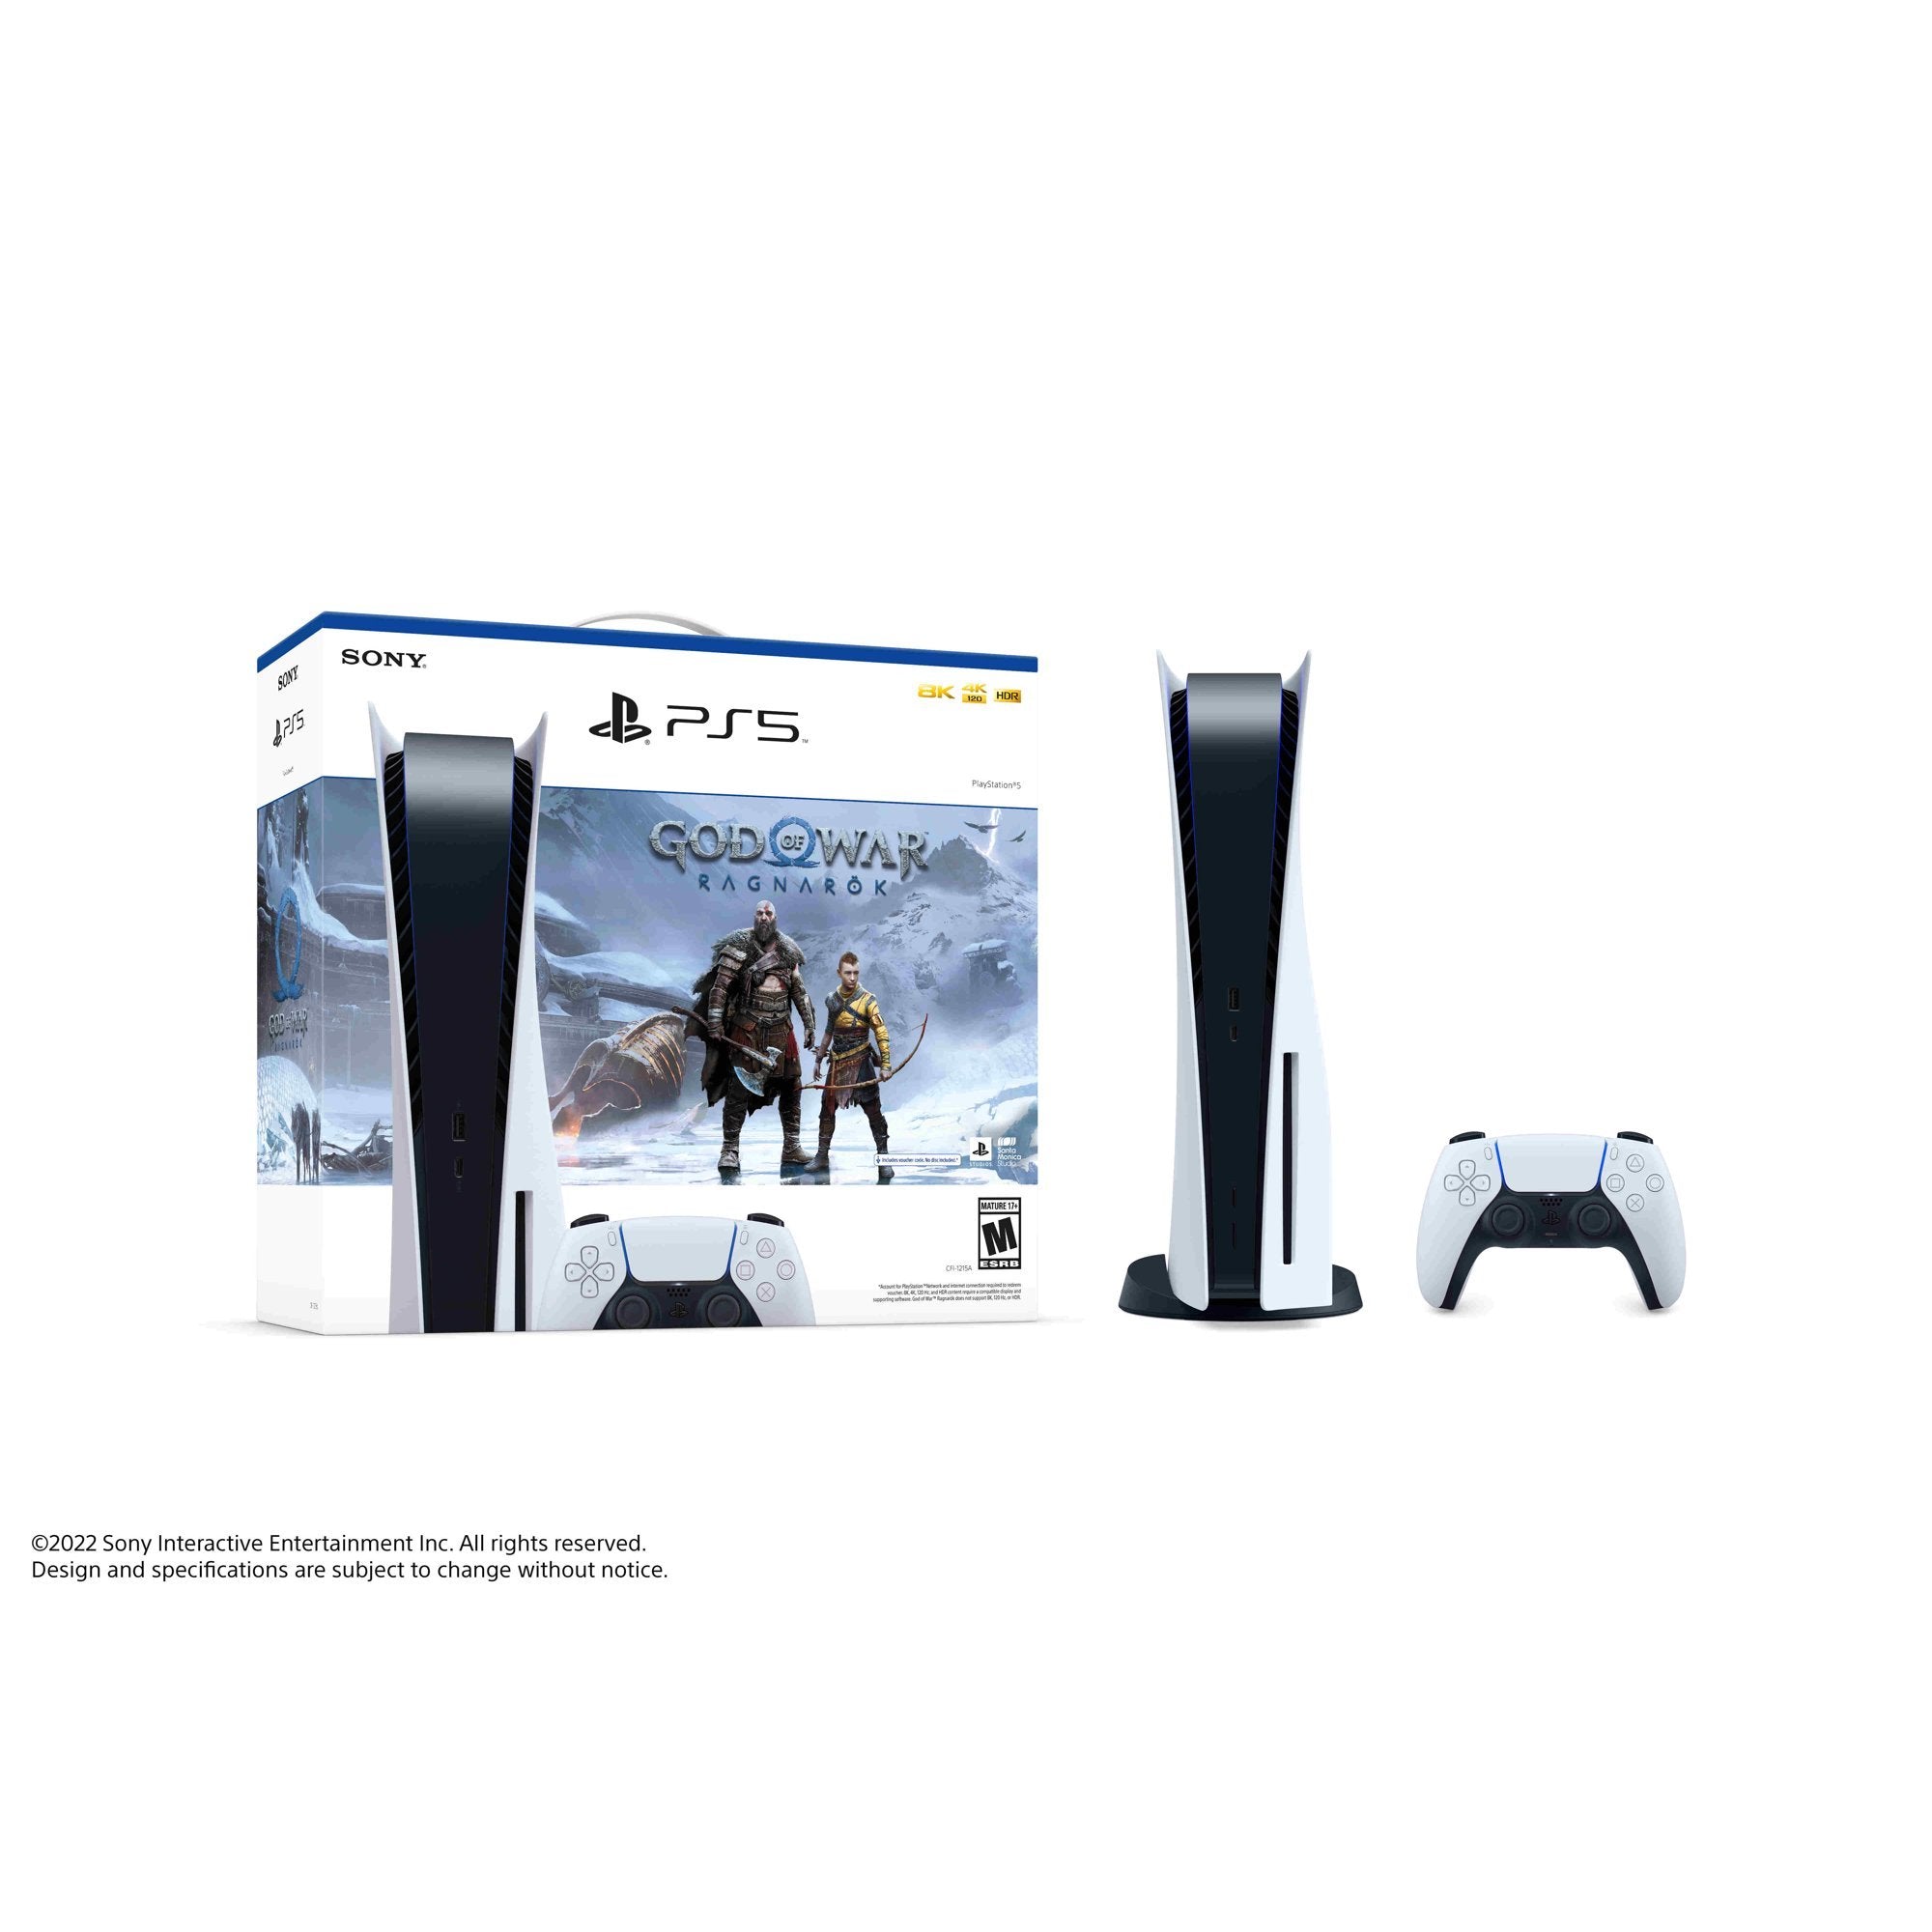 PlayStation 5 Disc Edition God of War Ragnarok Bundle with Two Controllers White and Nova Pink DualSense and Mytrix Dual Controller Charger